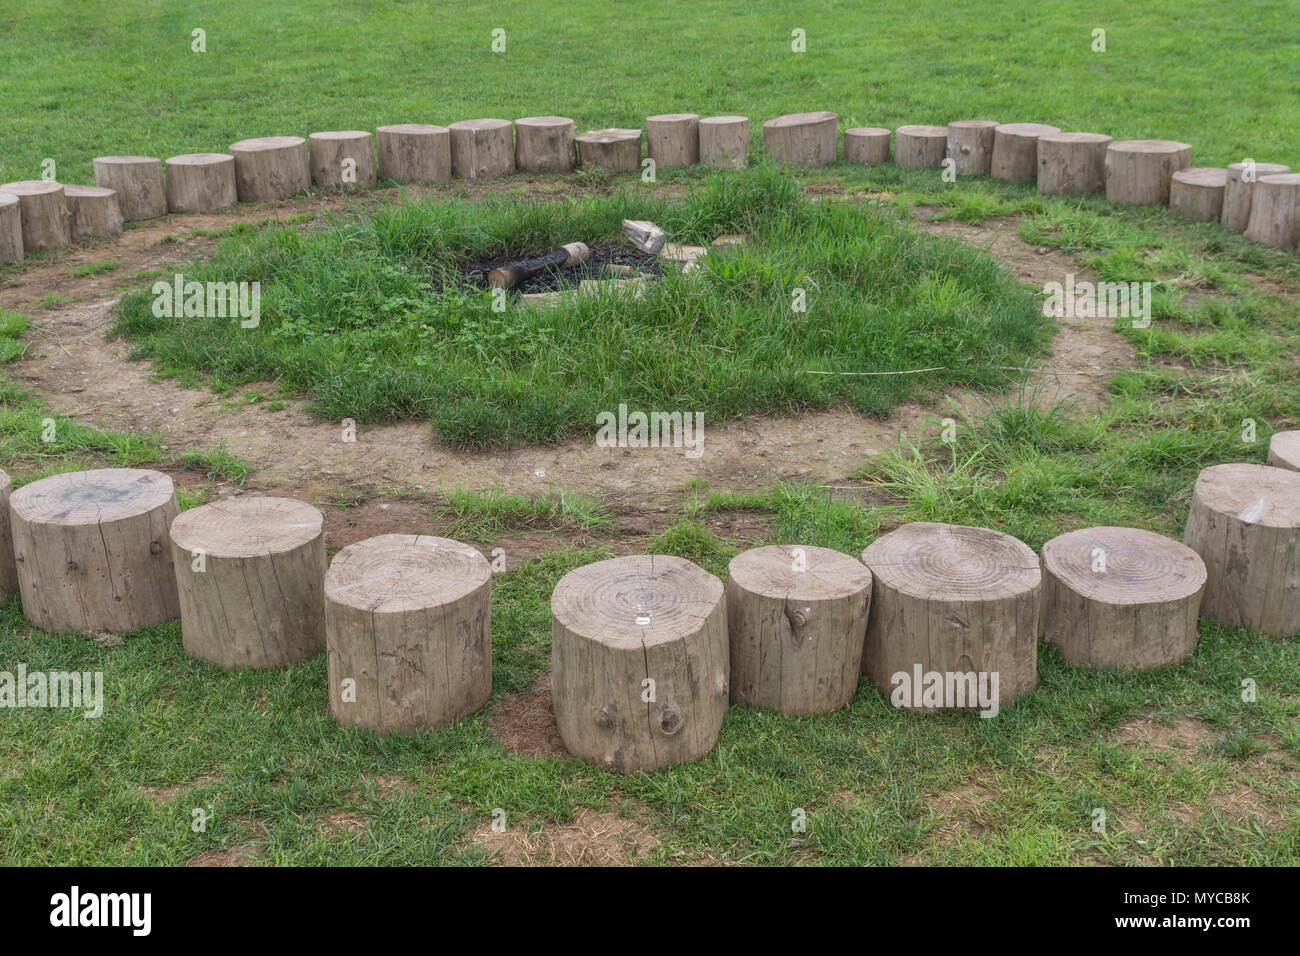 Log seating forming the 'fire circle' at an outdoors education centre. Stock Photo